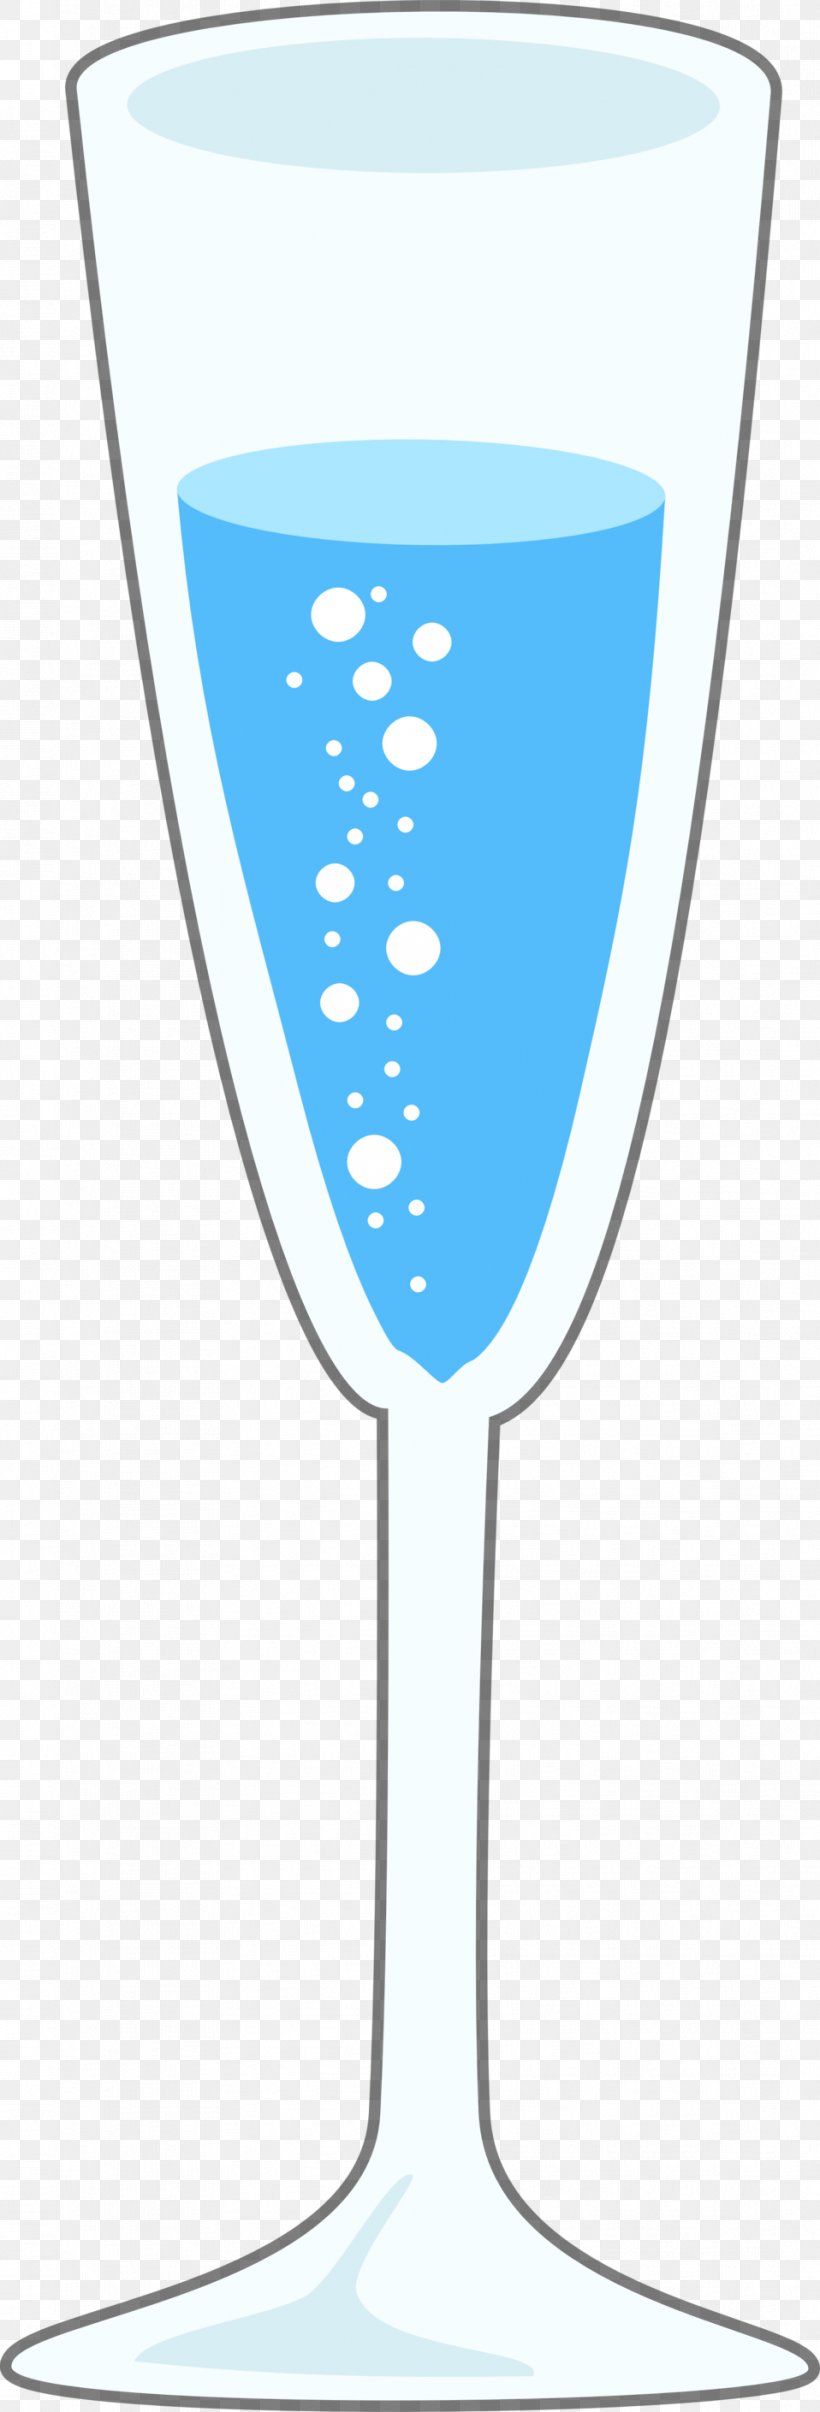 Sparkling Wine Fizzy Drinks Carbonated Water Glass Clip Art, PNG, 958x2819px, Sparkling Wine, Bottled Water, Carbonated Water, Carbonation, Champagne Glass Download Free